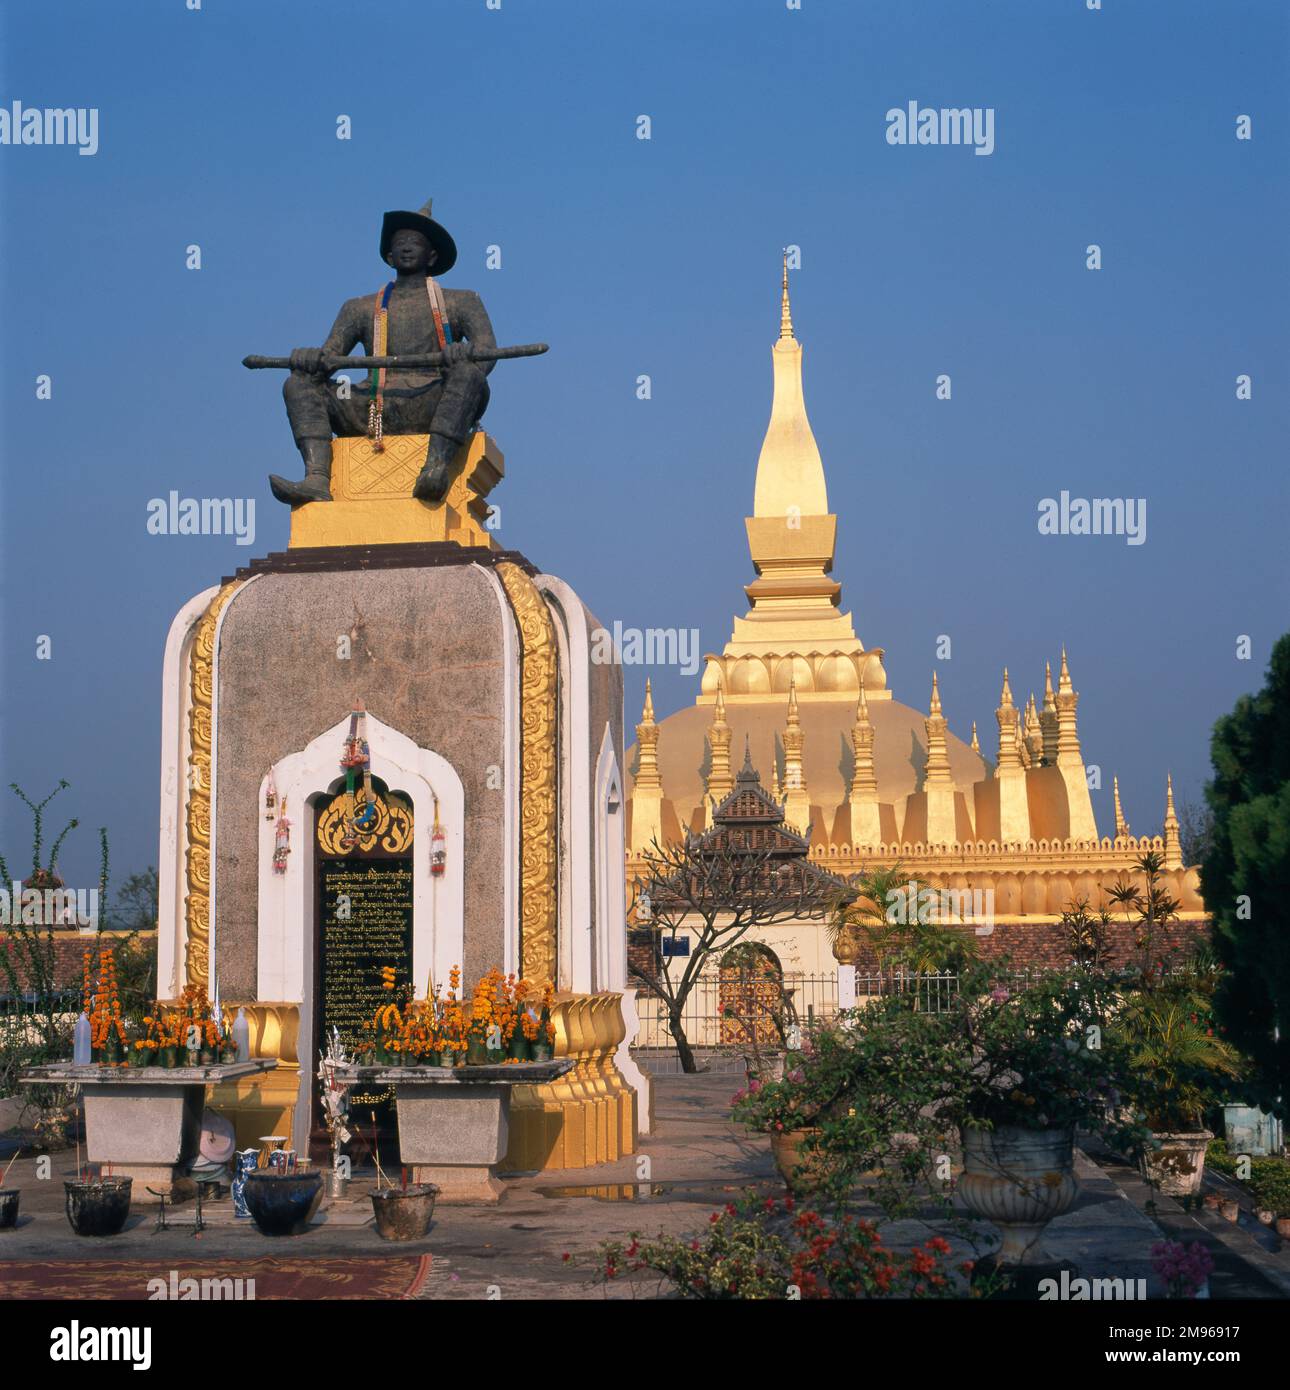 Monument to King Setthathirat (ruled 1559-1571) of Lan Xang (left), with the golden stupa of That Luang Wat Buddhist Temple (right), at Vientiane, Laos. Stock Photo